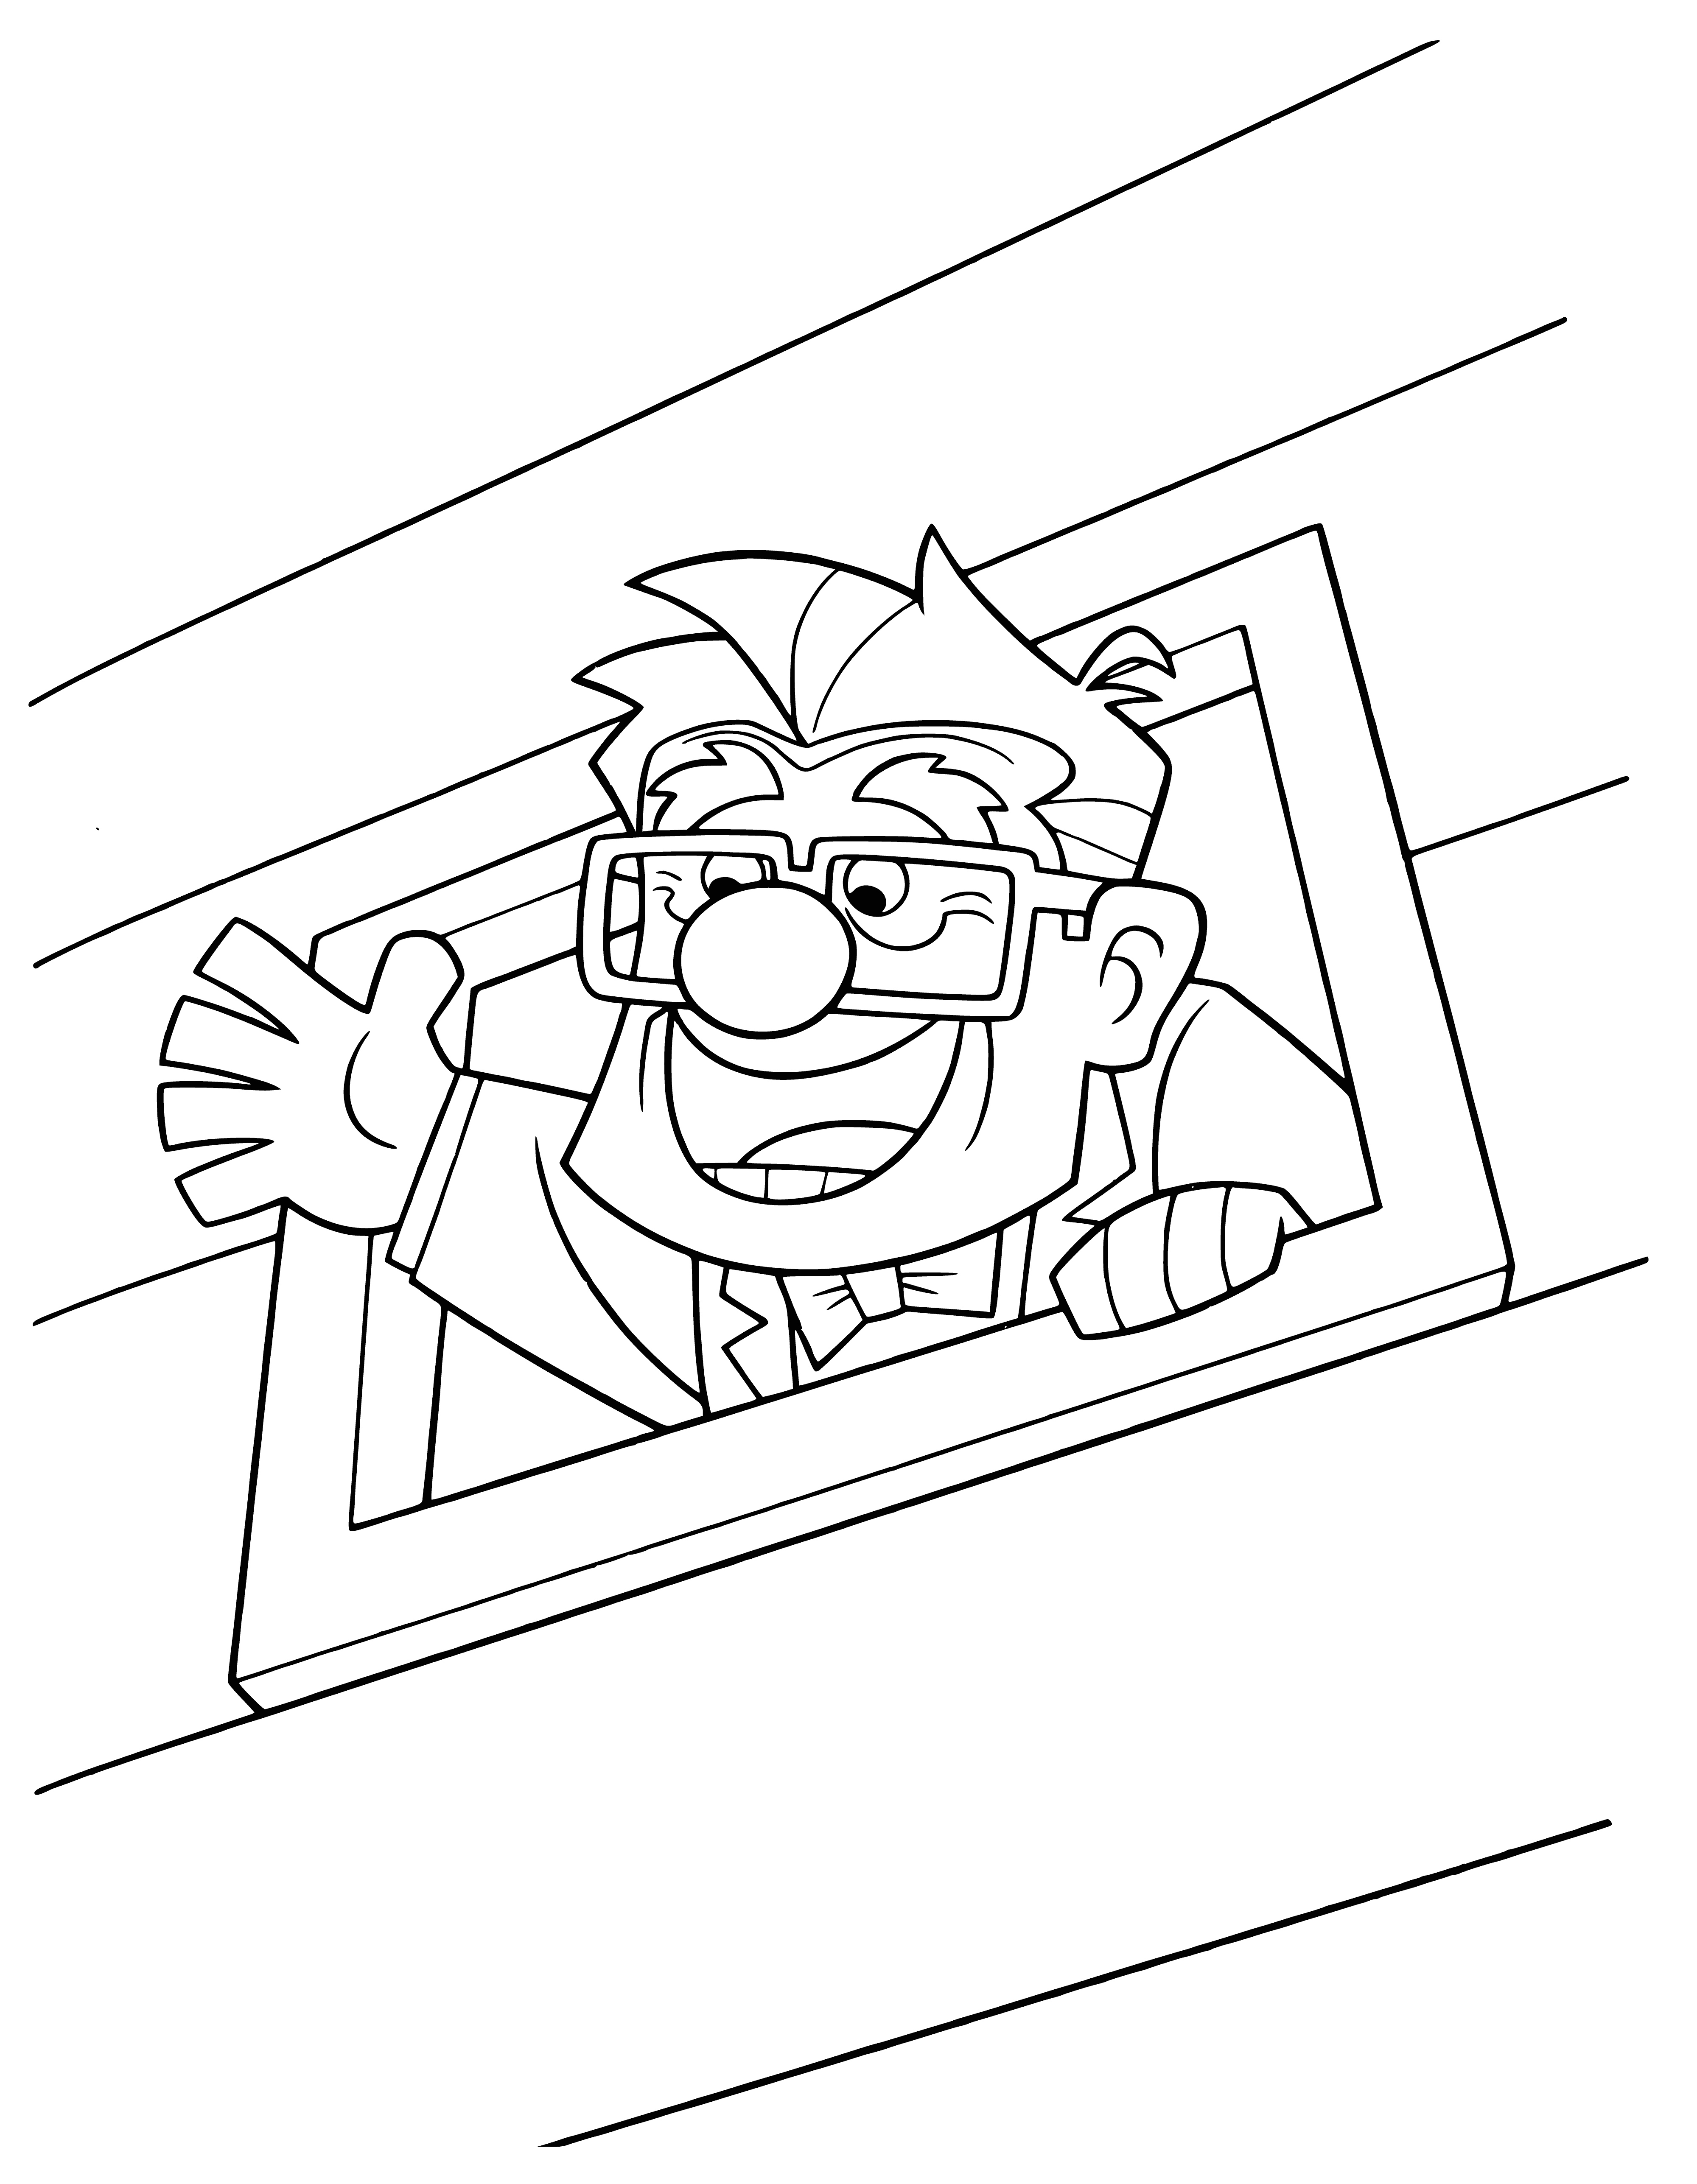 coloring page: Boy smiling atop colorful blocks—happiness in creating something from nothing.